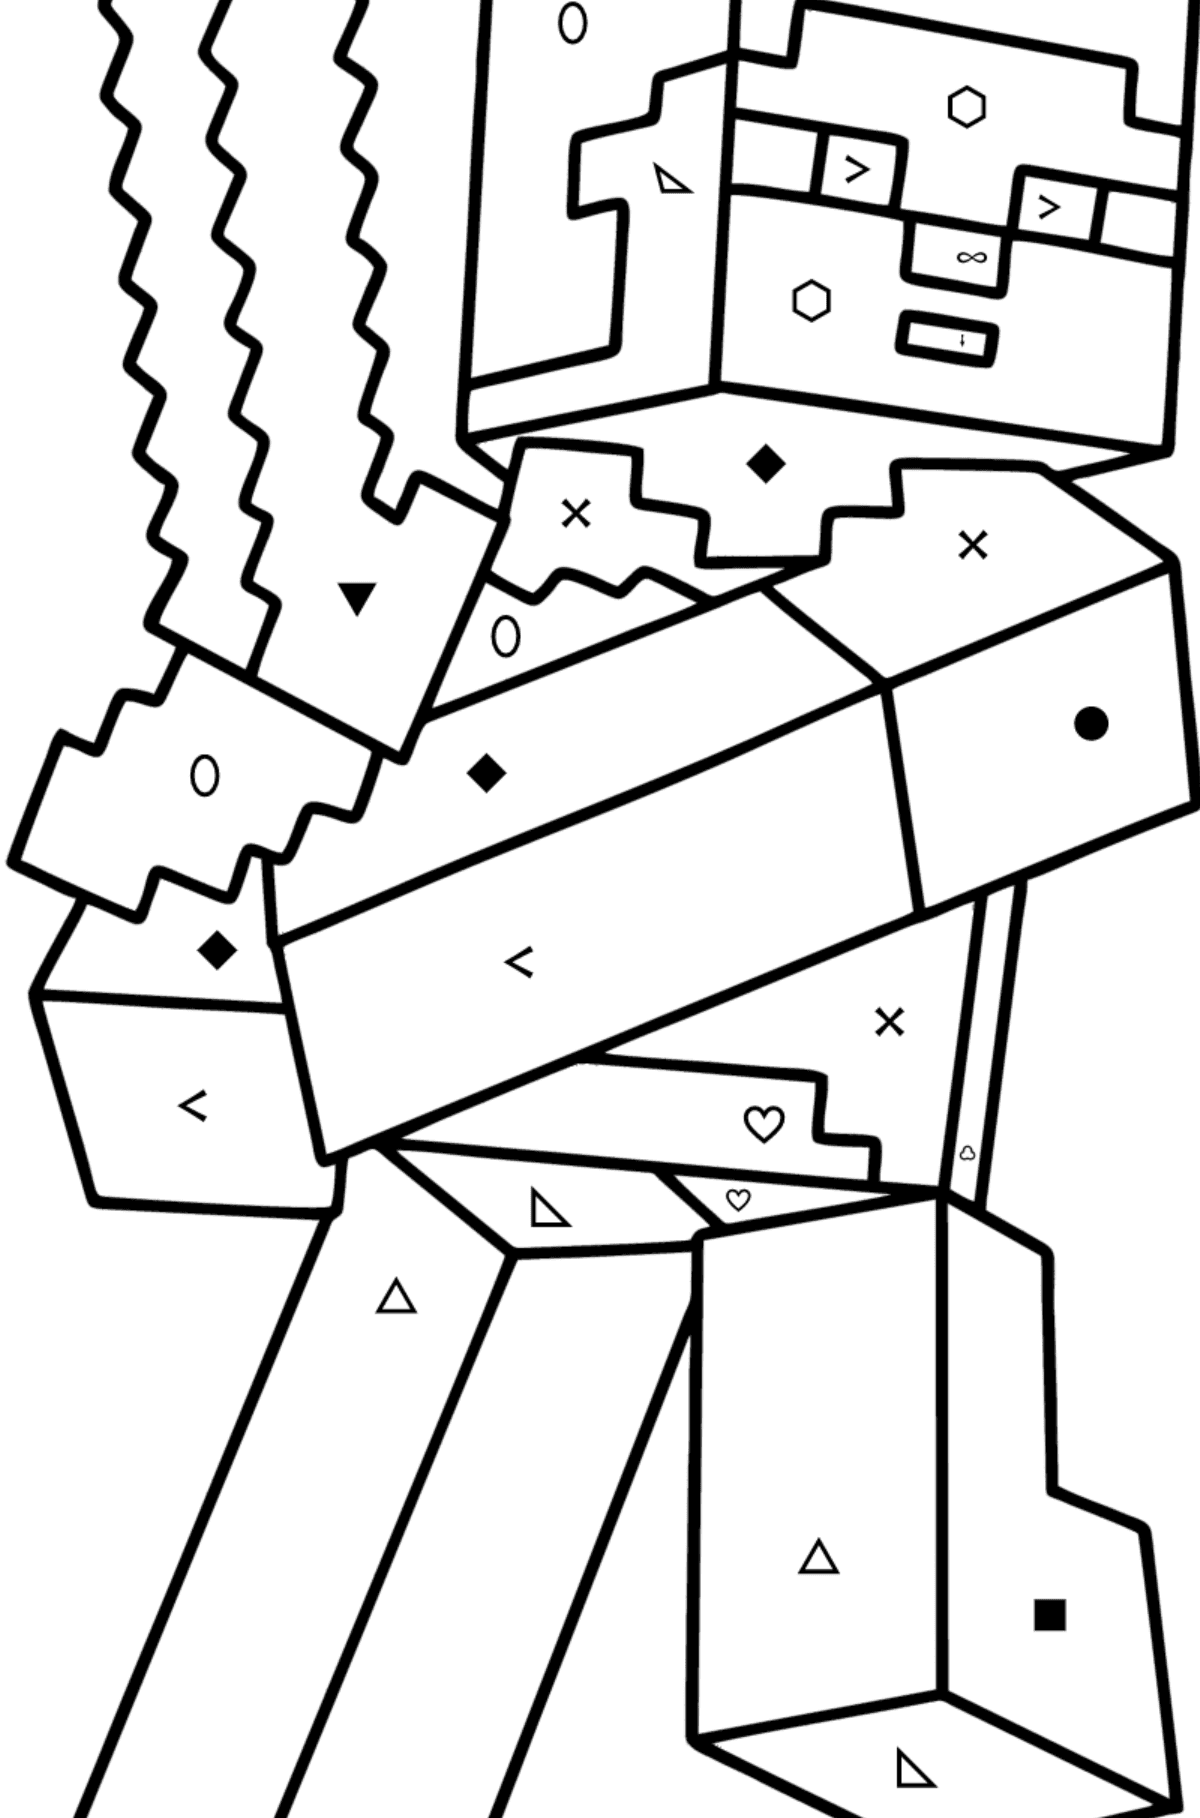 Minecraft Steve coloring page - Coloring by Symbols and Geometric Shapes for Kids